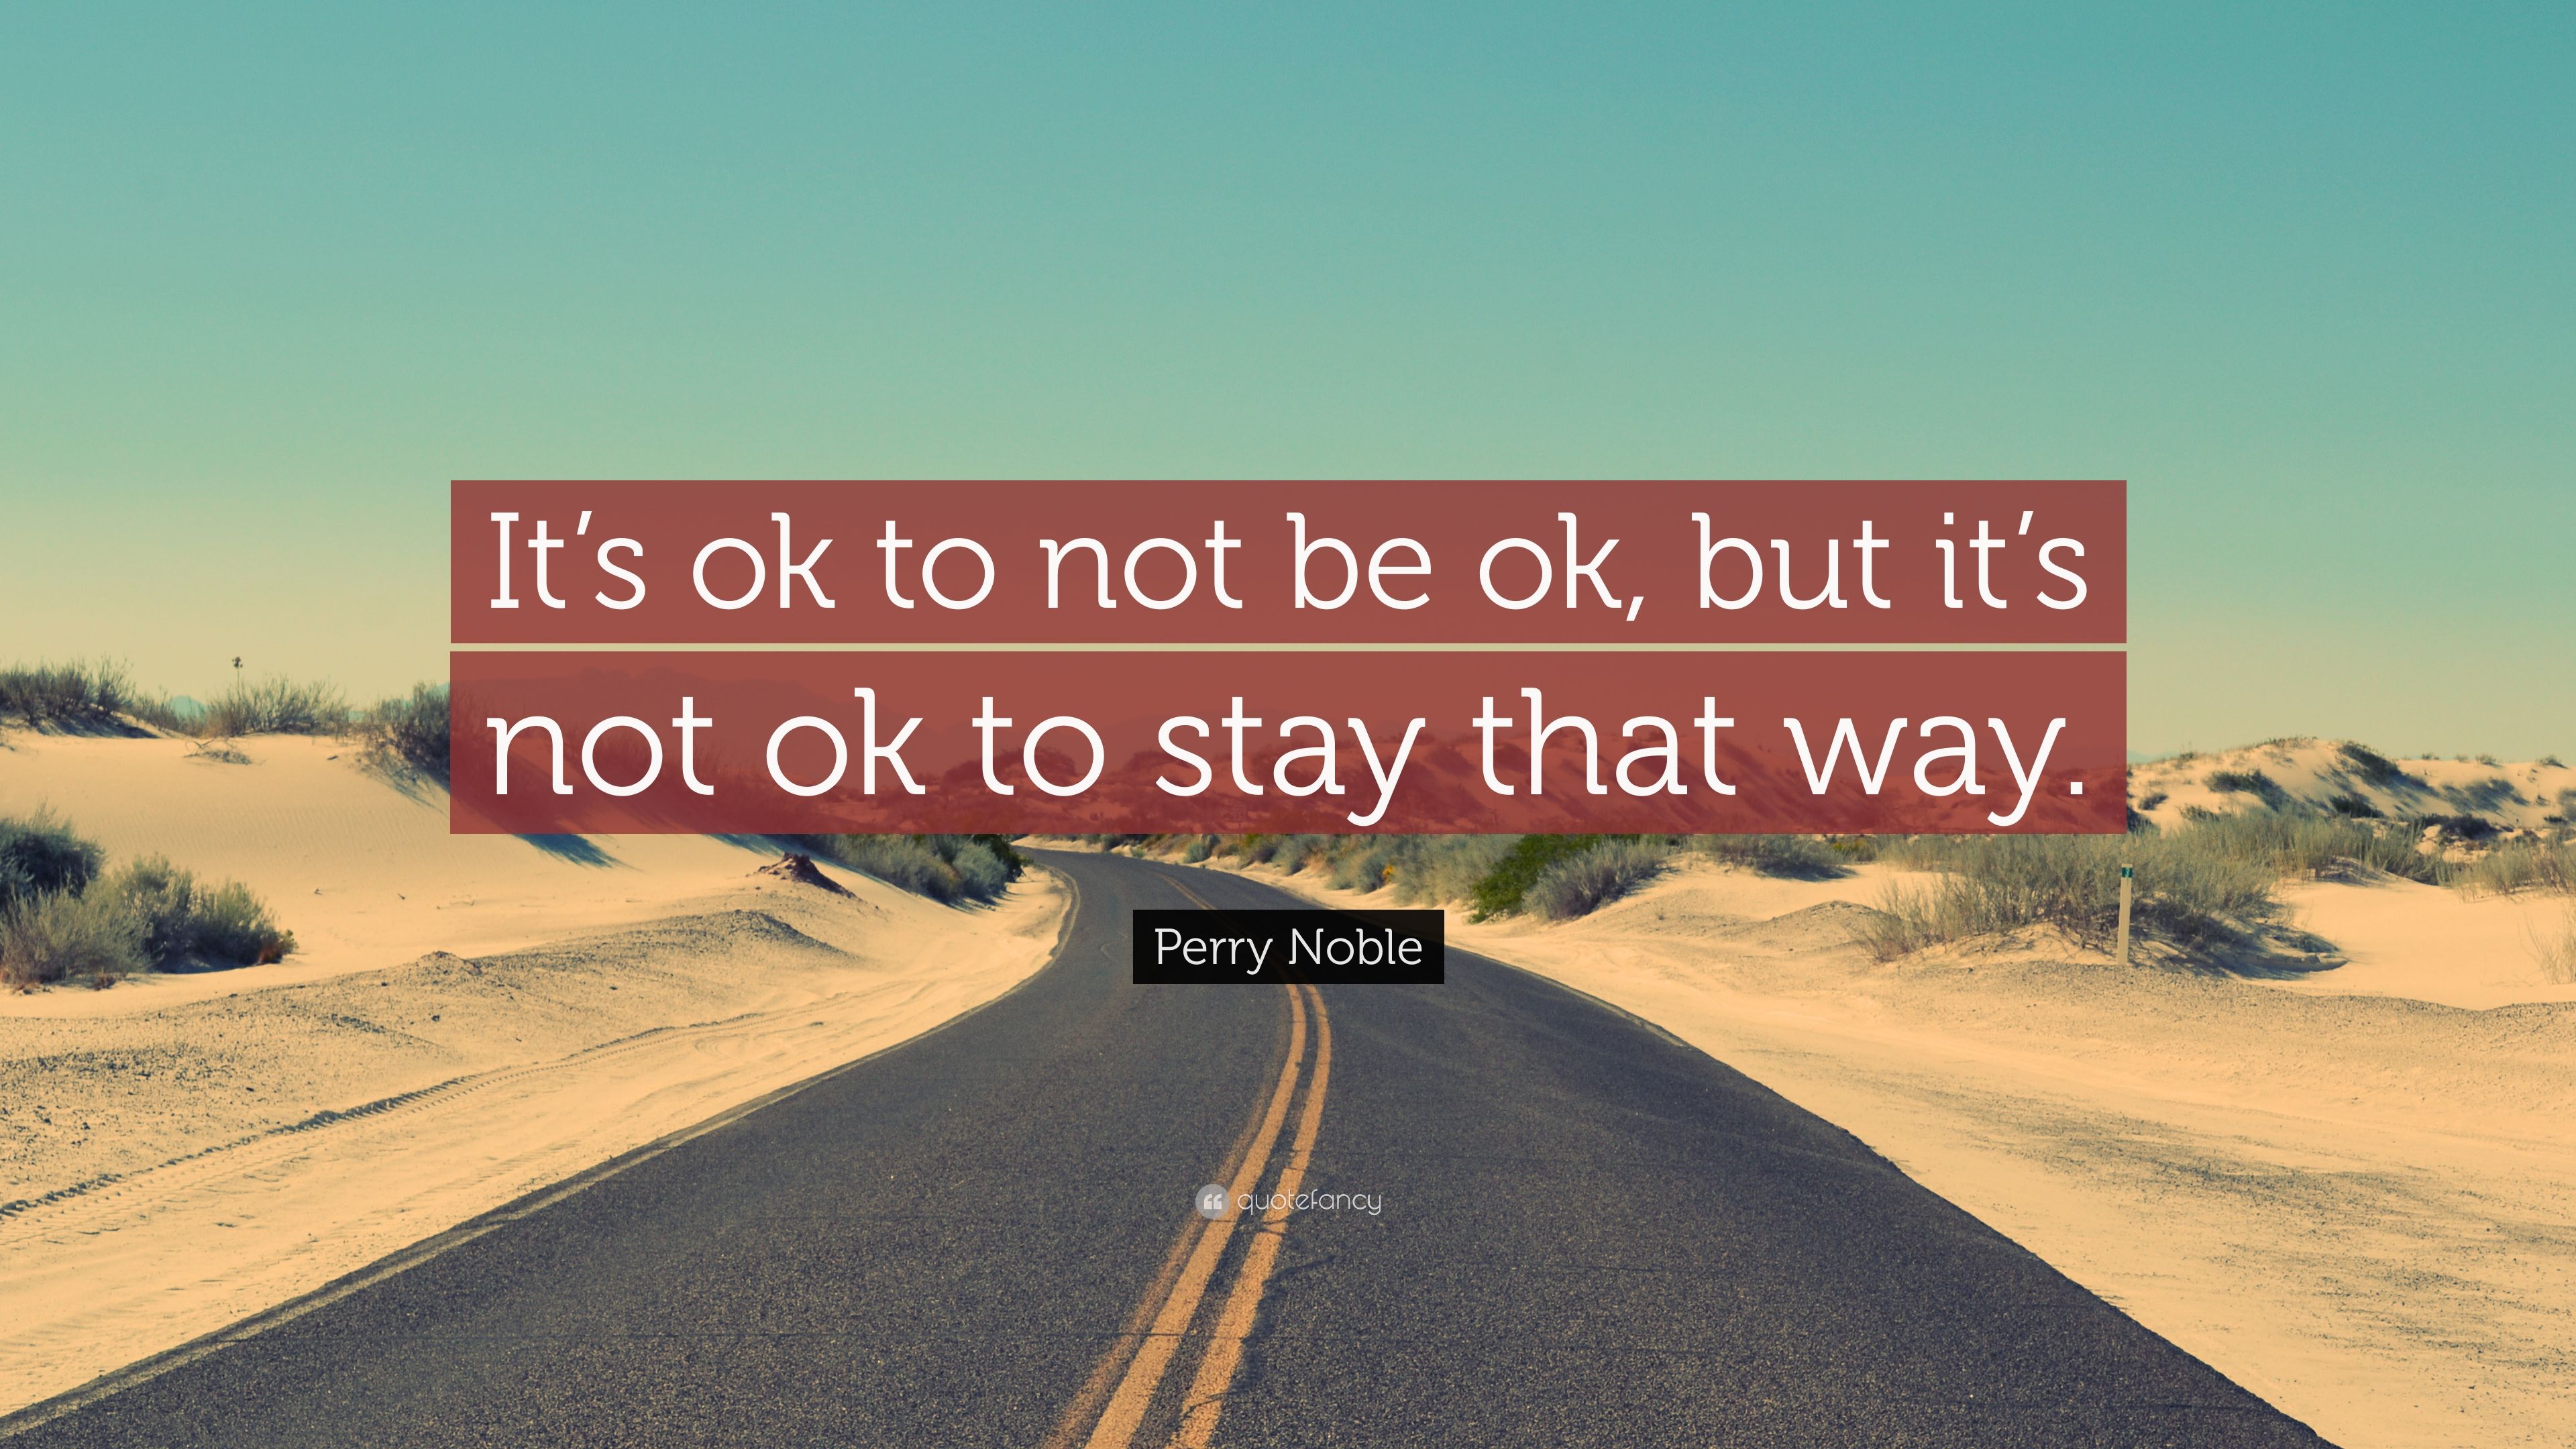 Perry Noble Quote: “It's ok to not be ok, but it's not ok to stay